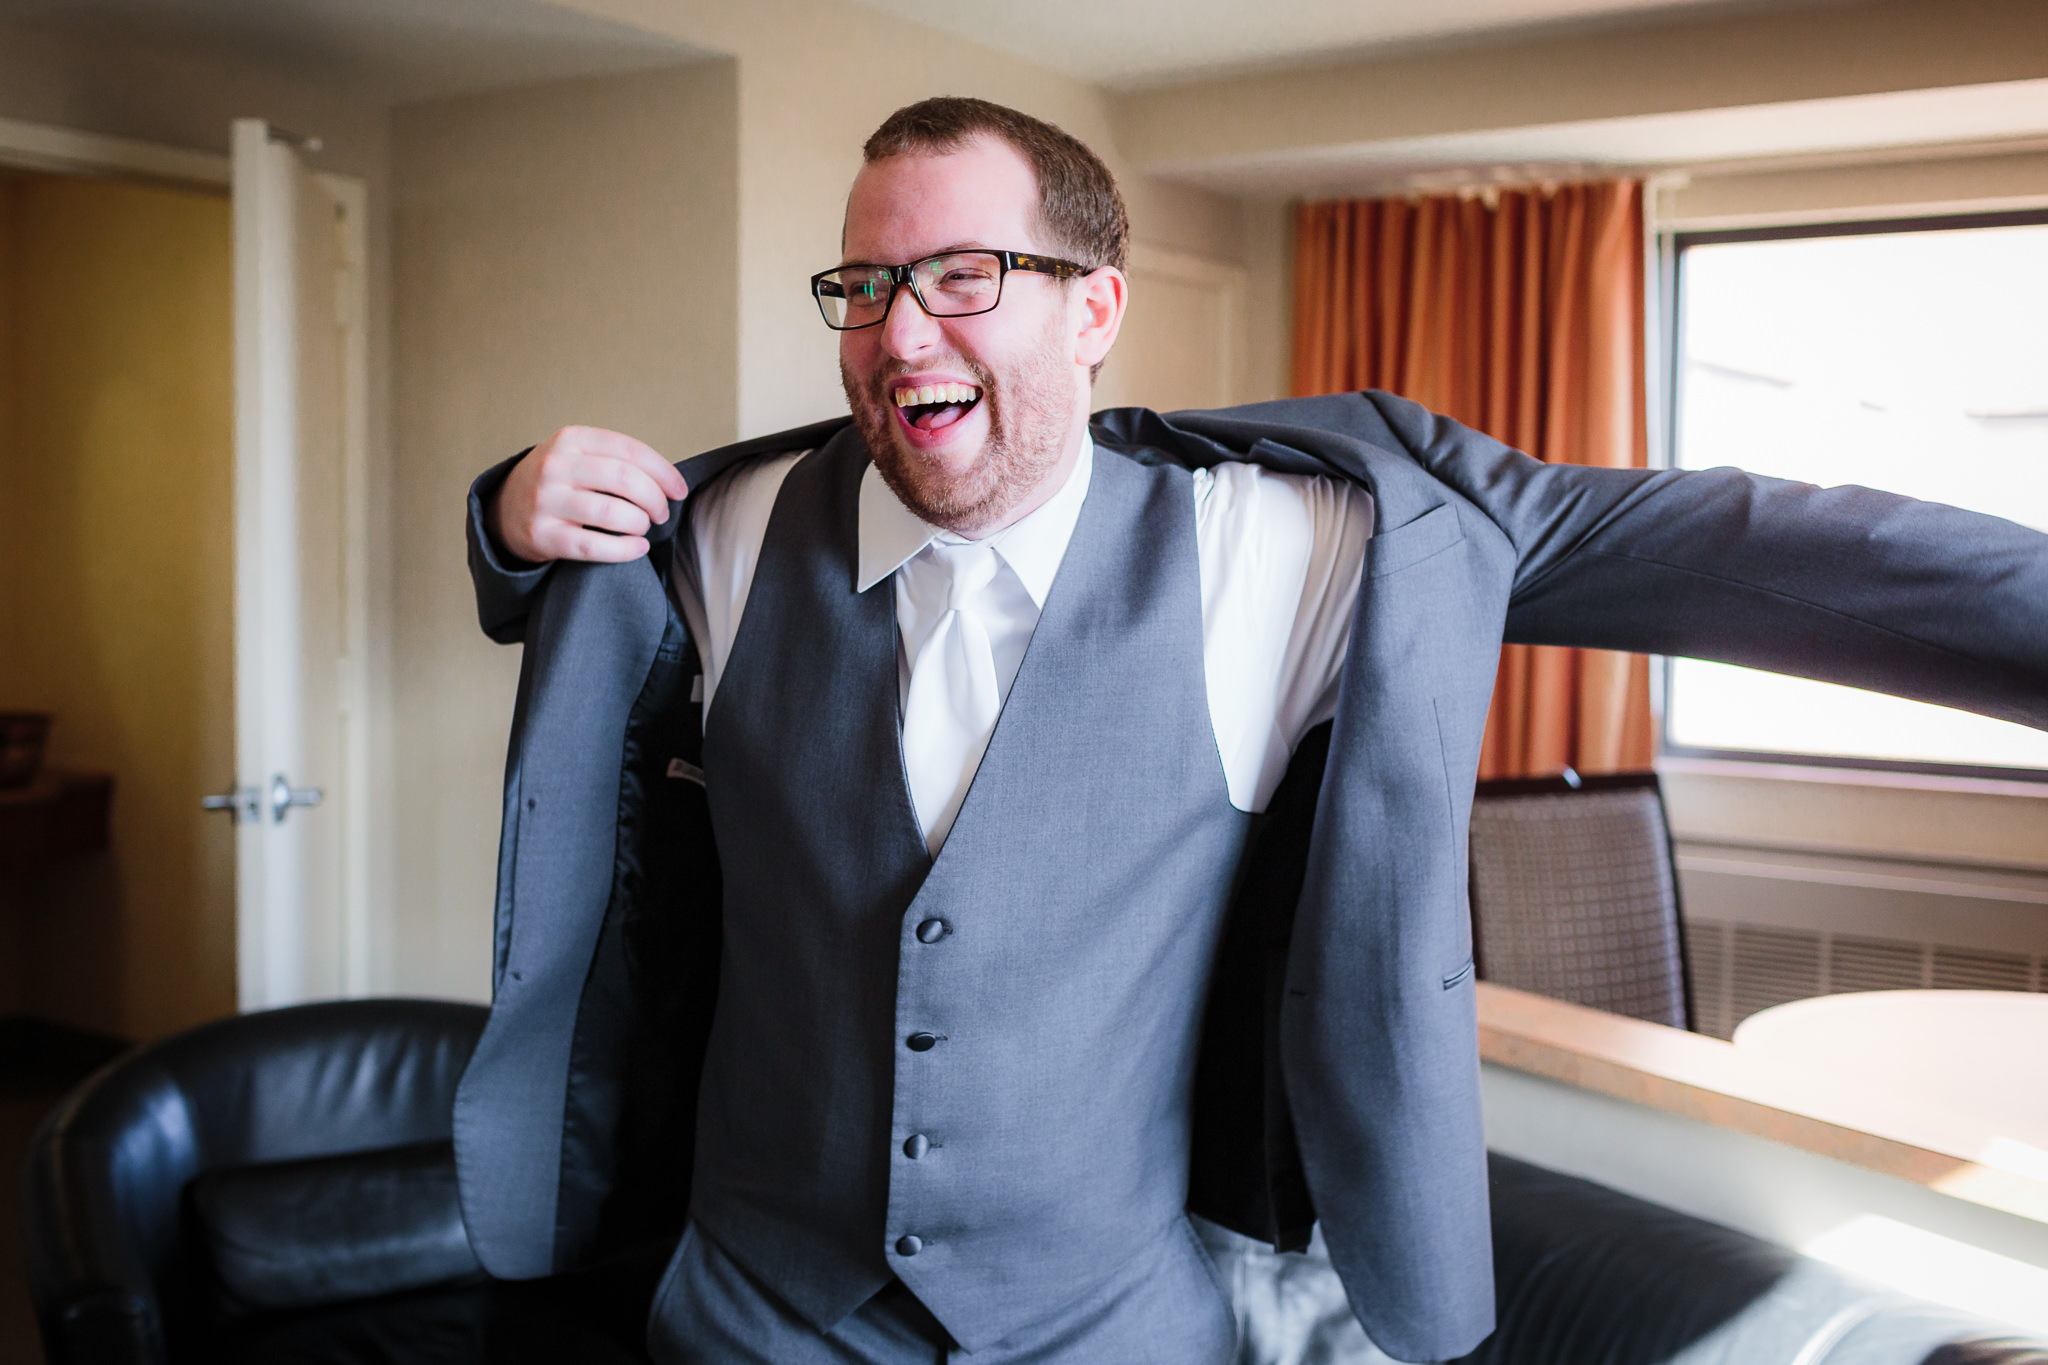 Groom laughs as he puts on his gray Joseph Abboud tux jacket from Men's Wearhouse